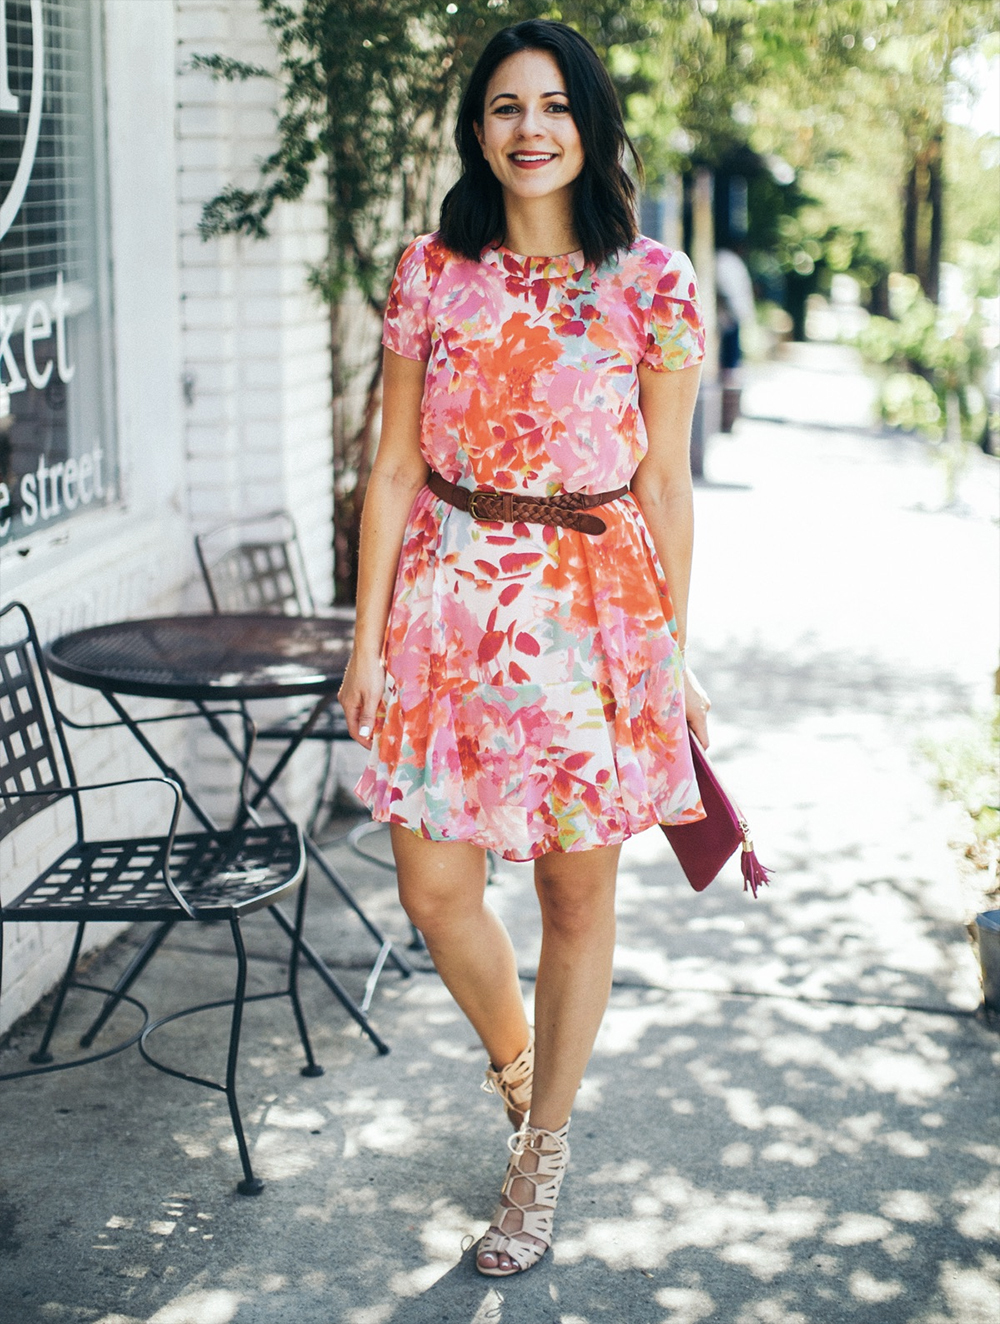 floral dress outfit